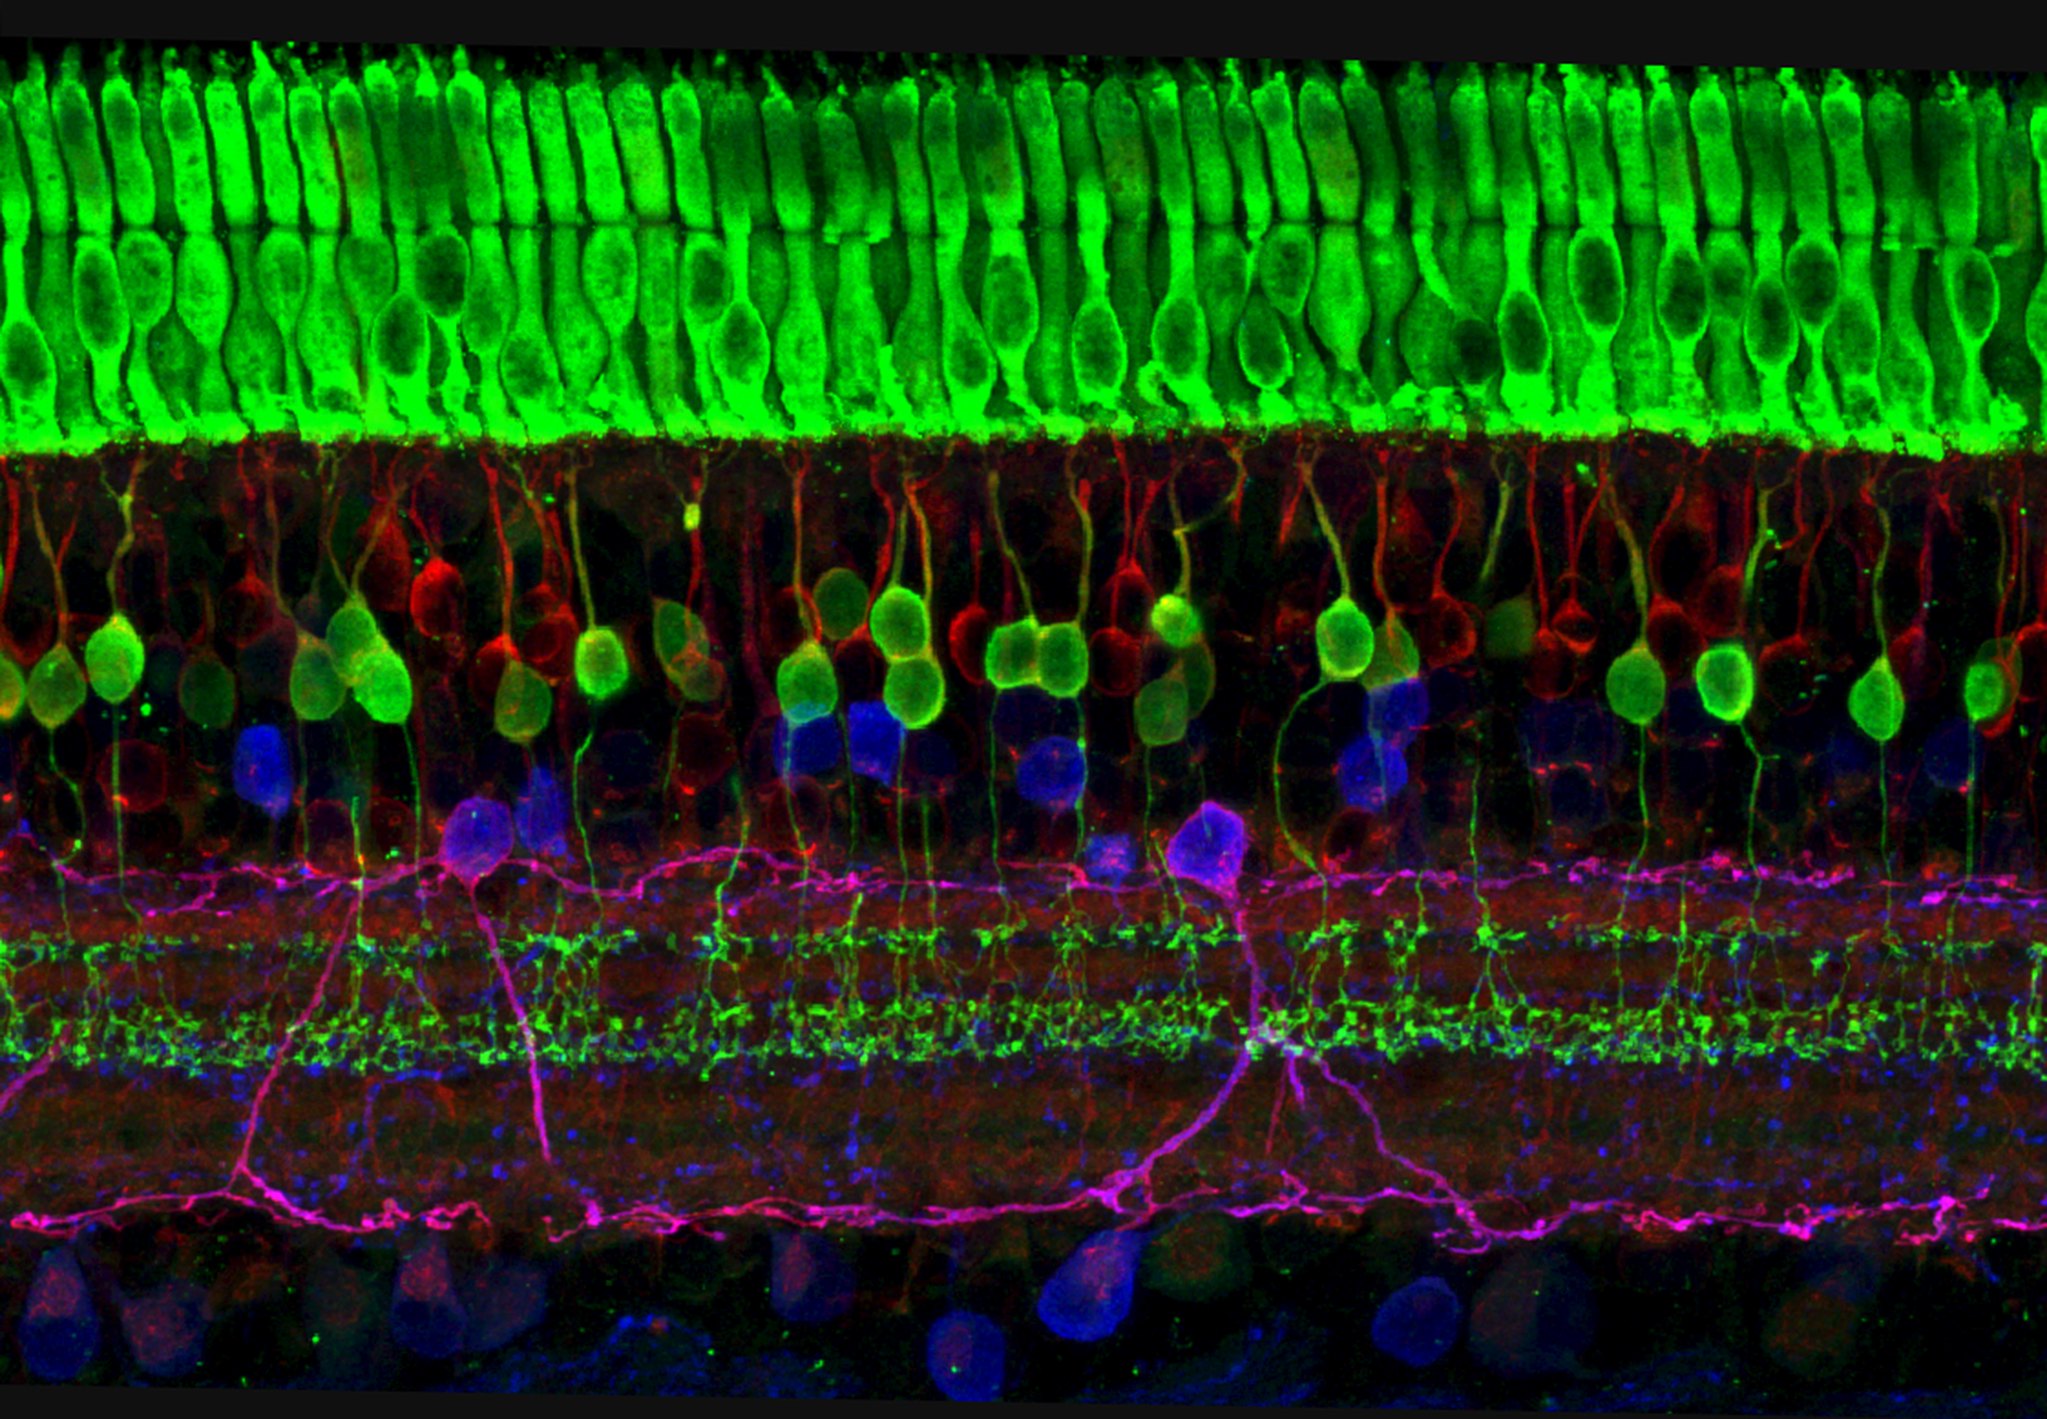 Microscope image. Black background; neon green, tightly packed cylindrical-looking cells at the top, with more sparse layers of red, blue, purple, and green cells below.